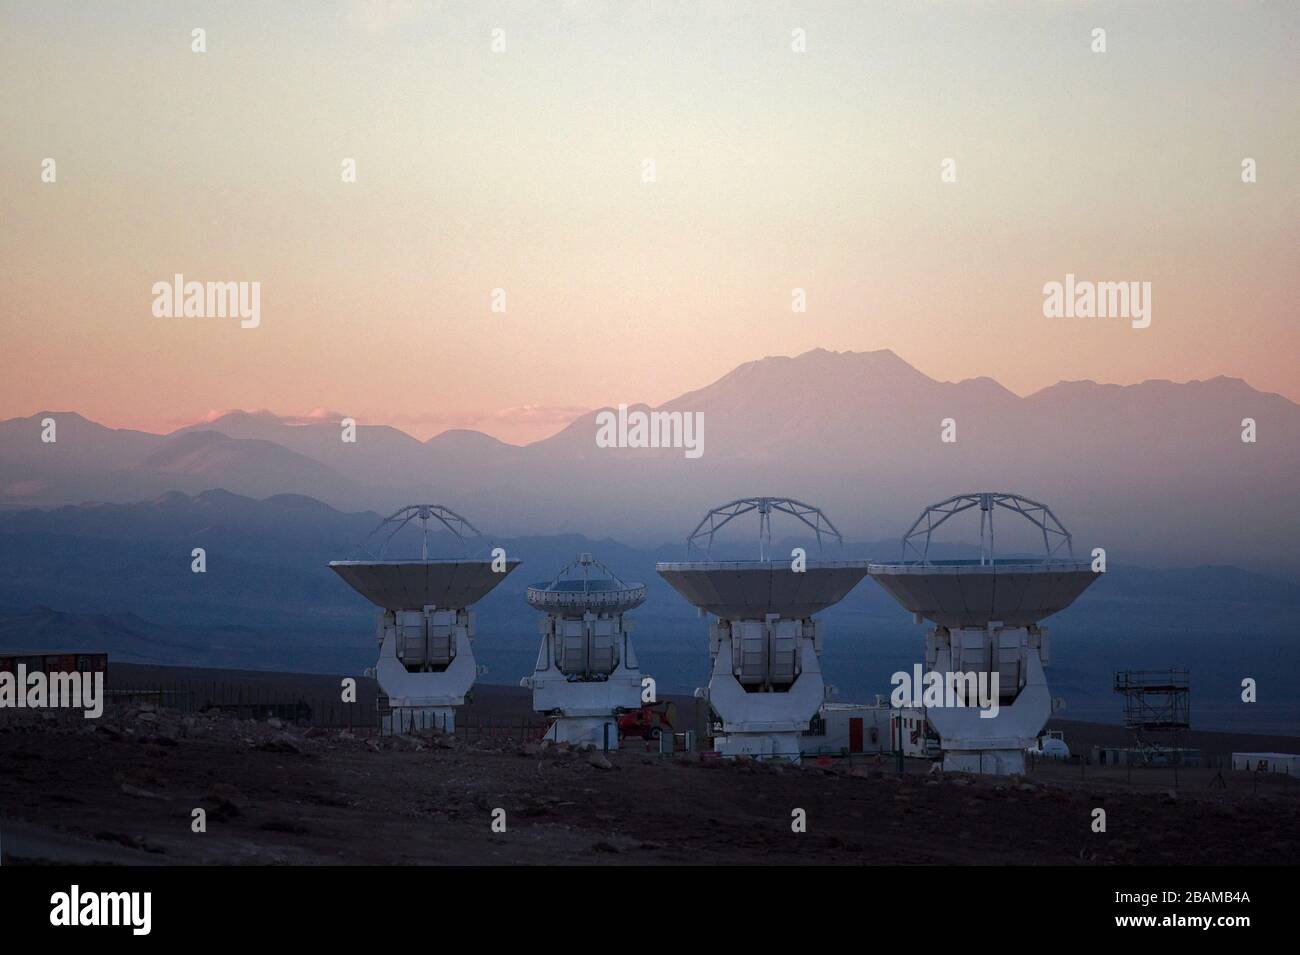 vervagen roze Preek English: Four large antennas for the Atacama Large Millimeter/submillimeter  Array (ALMA) thrust to the sky at the Operations Support Facility (OSF),  2900 m above sea level. ALMA is the largest ground-based astronomy